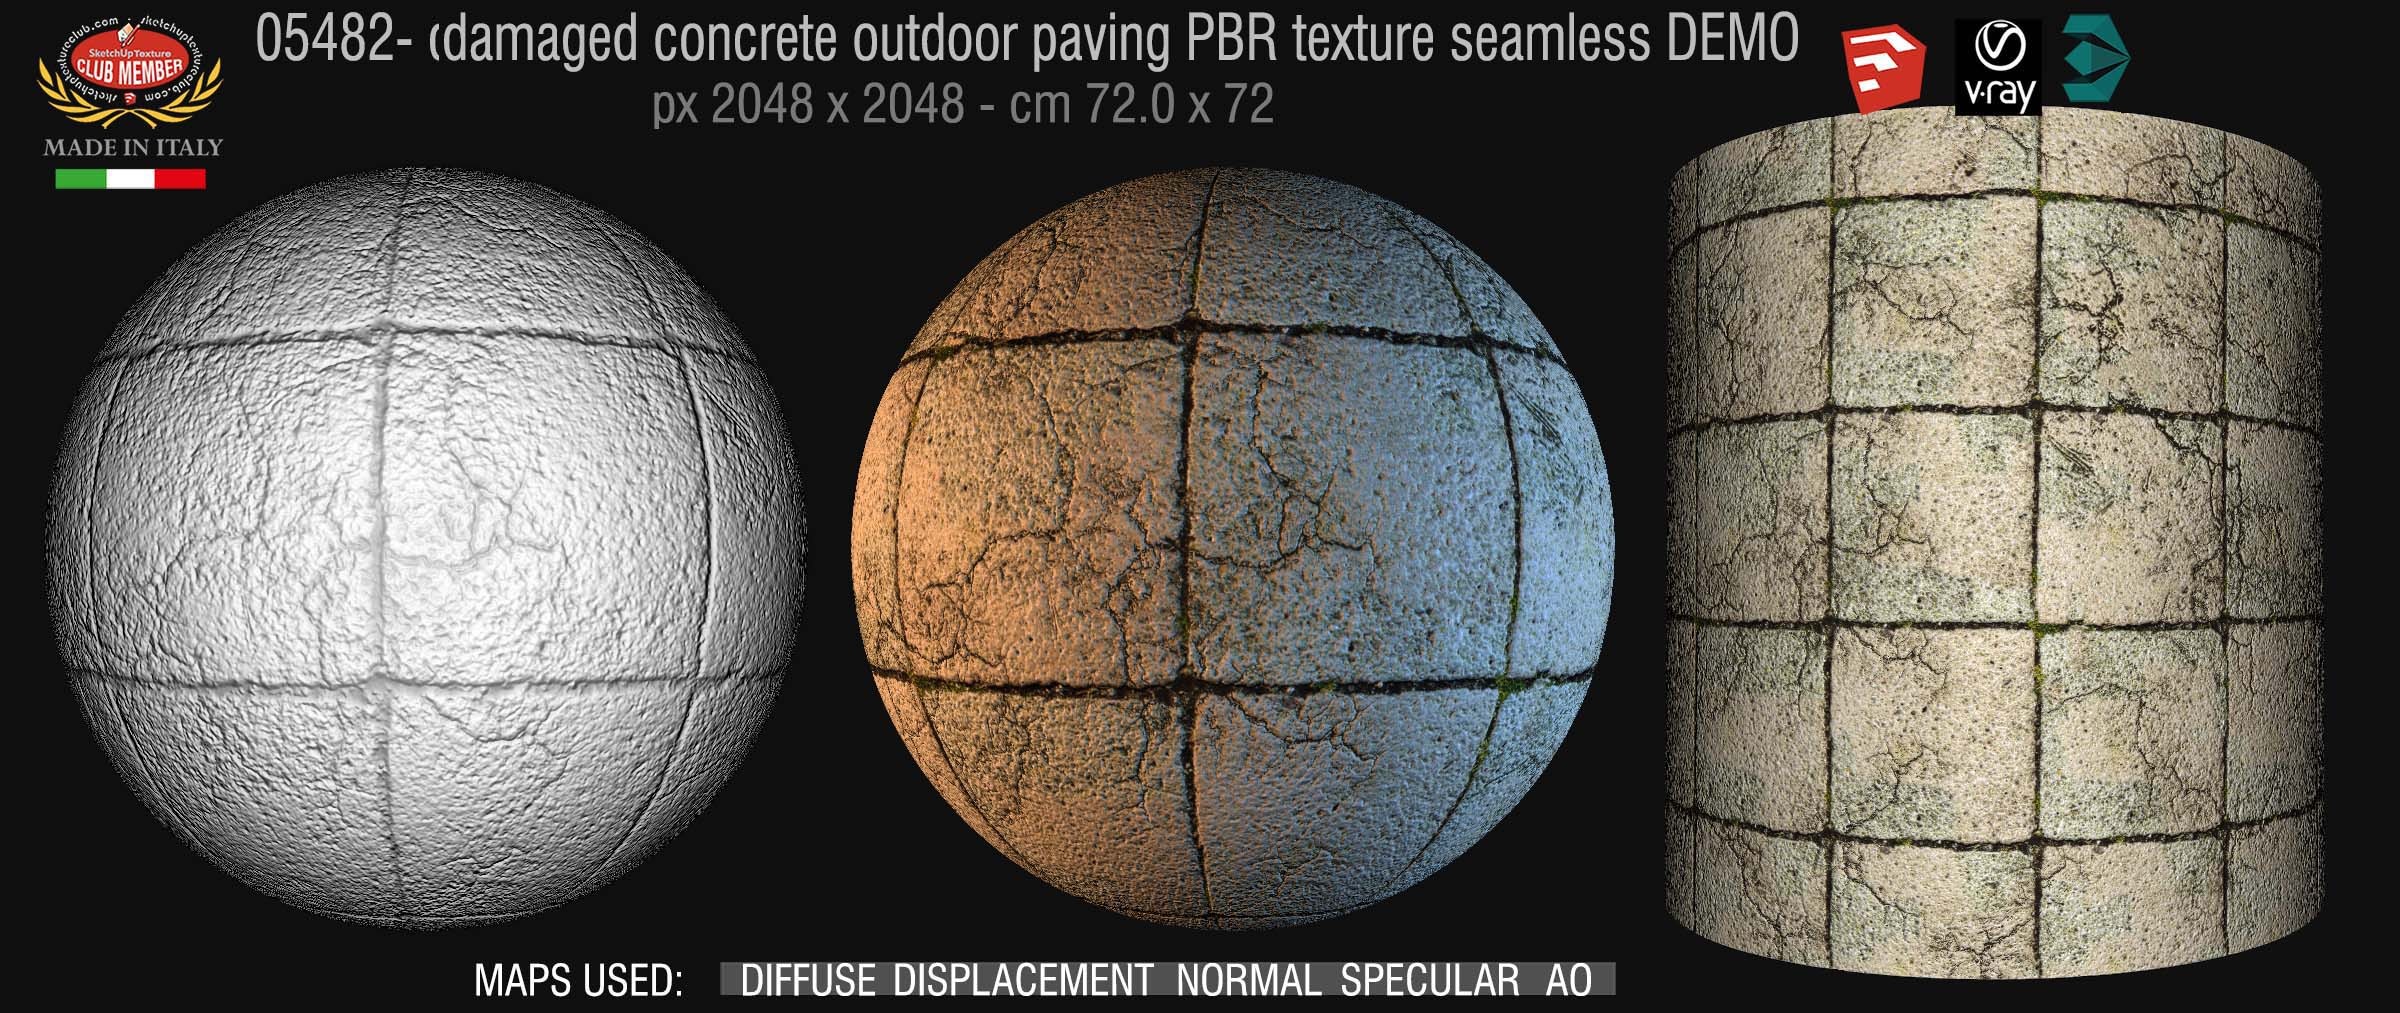 05482 Damaged concrete outdoor paving PBR texture seamless DEMO